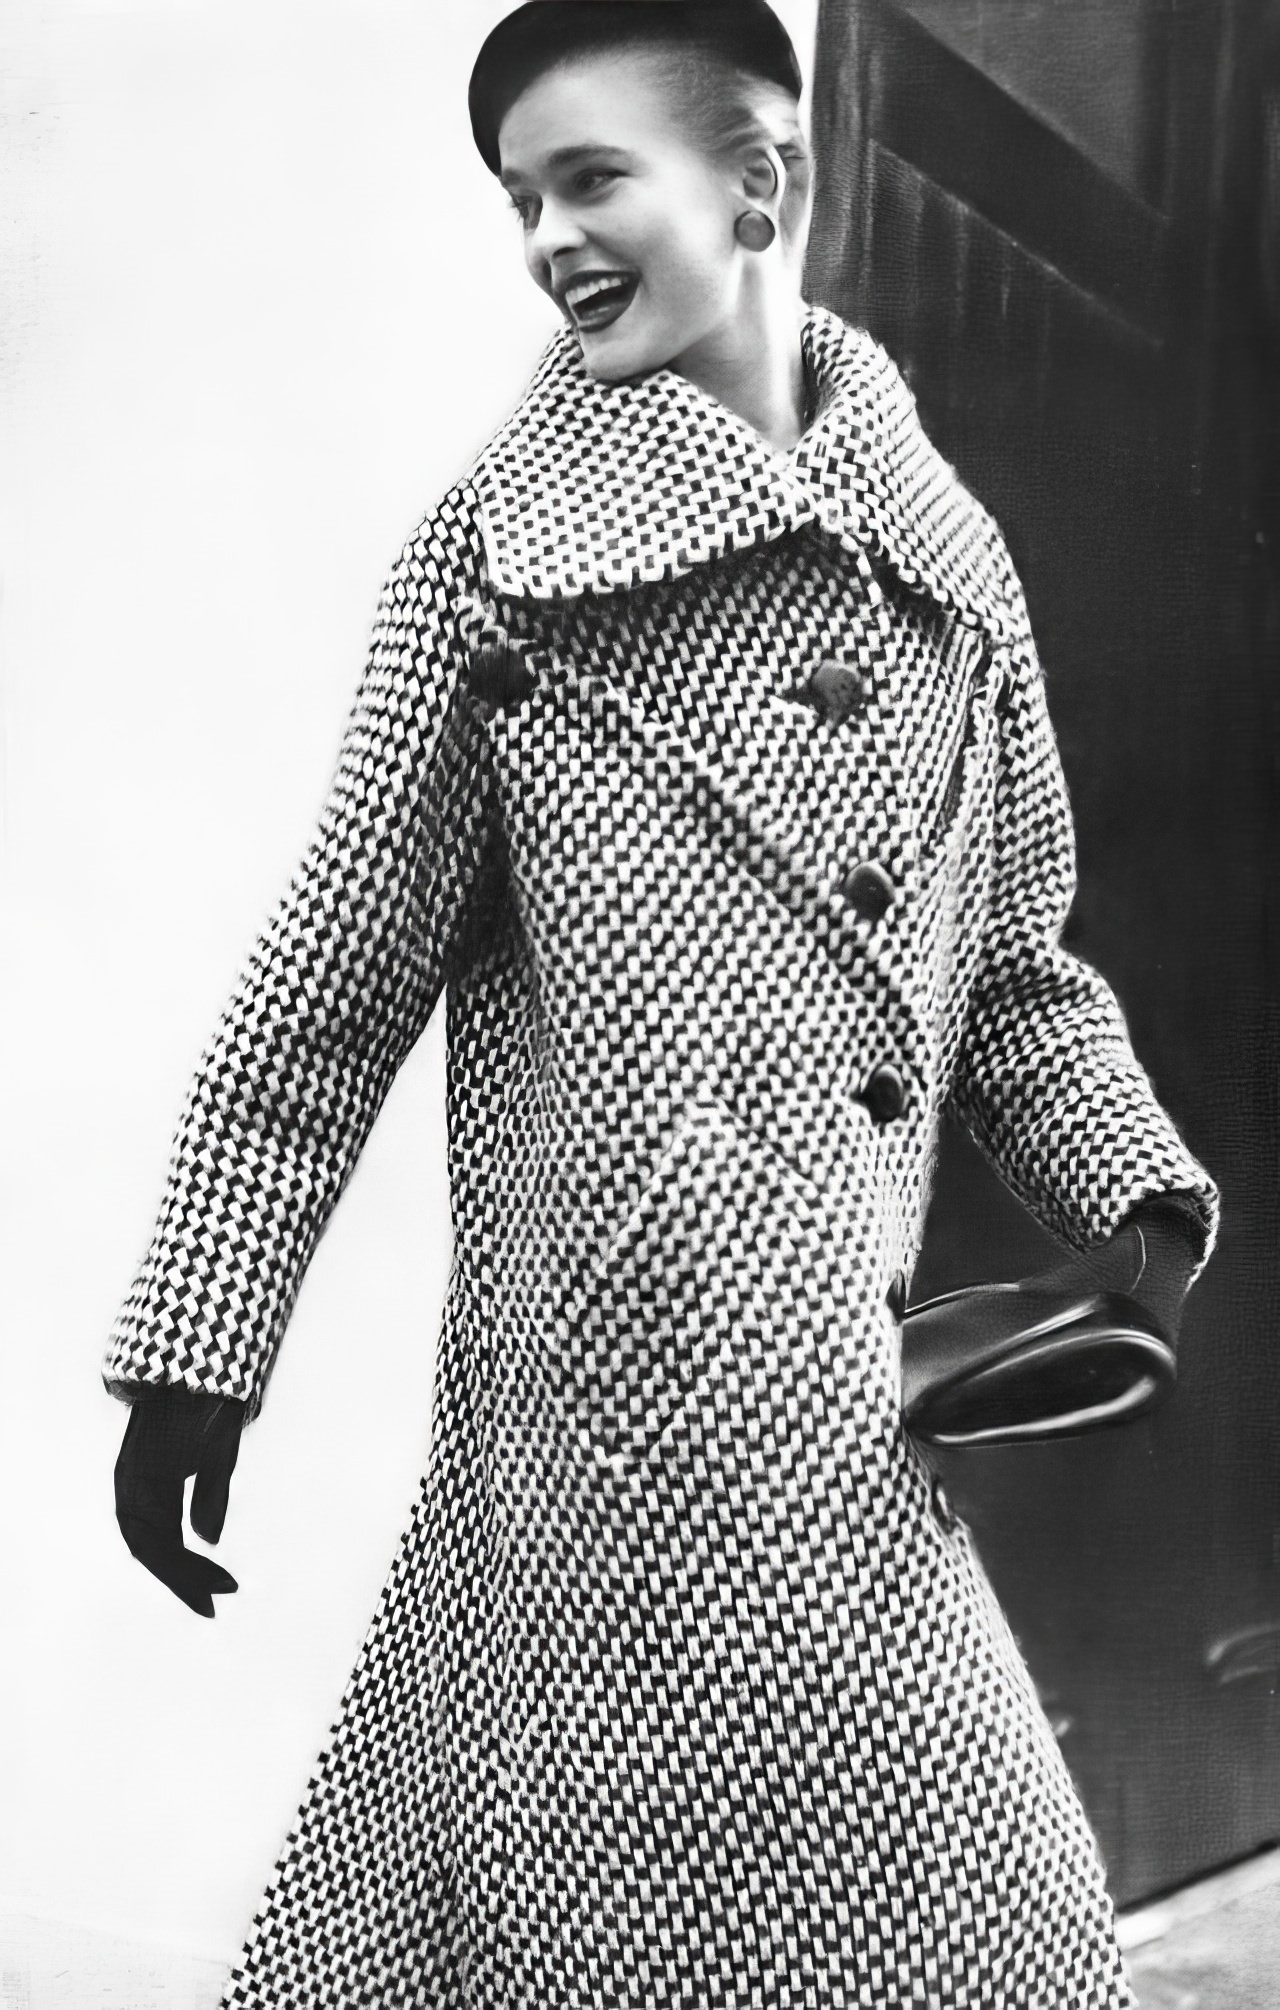 Susan Abraham in a bold black and white basket-tweed coat, 1953.